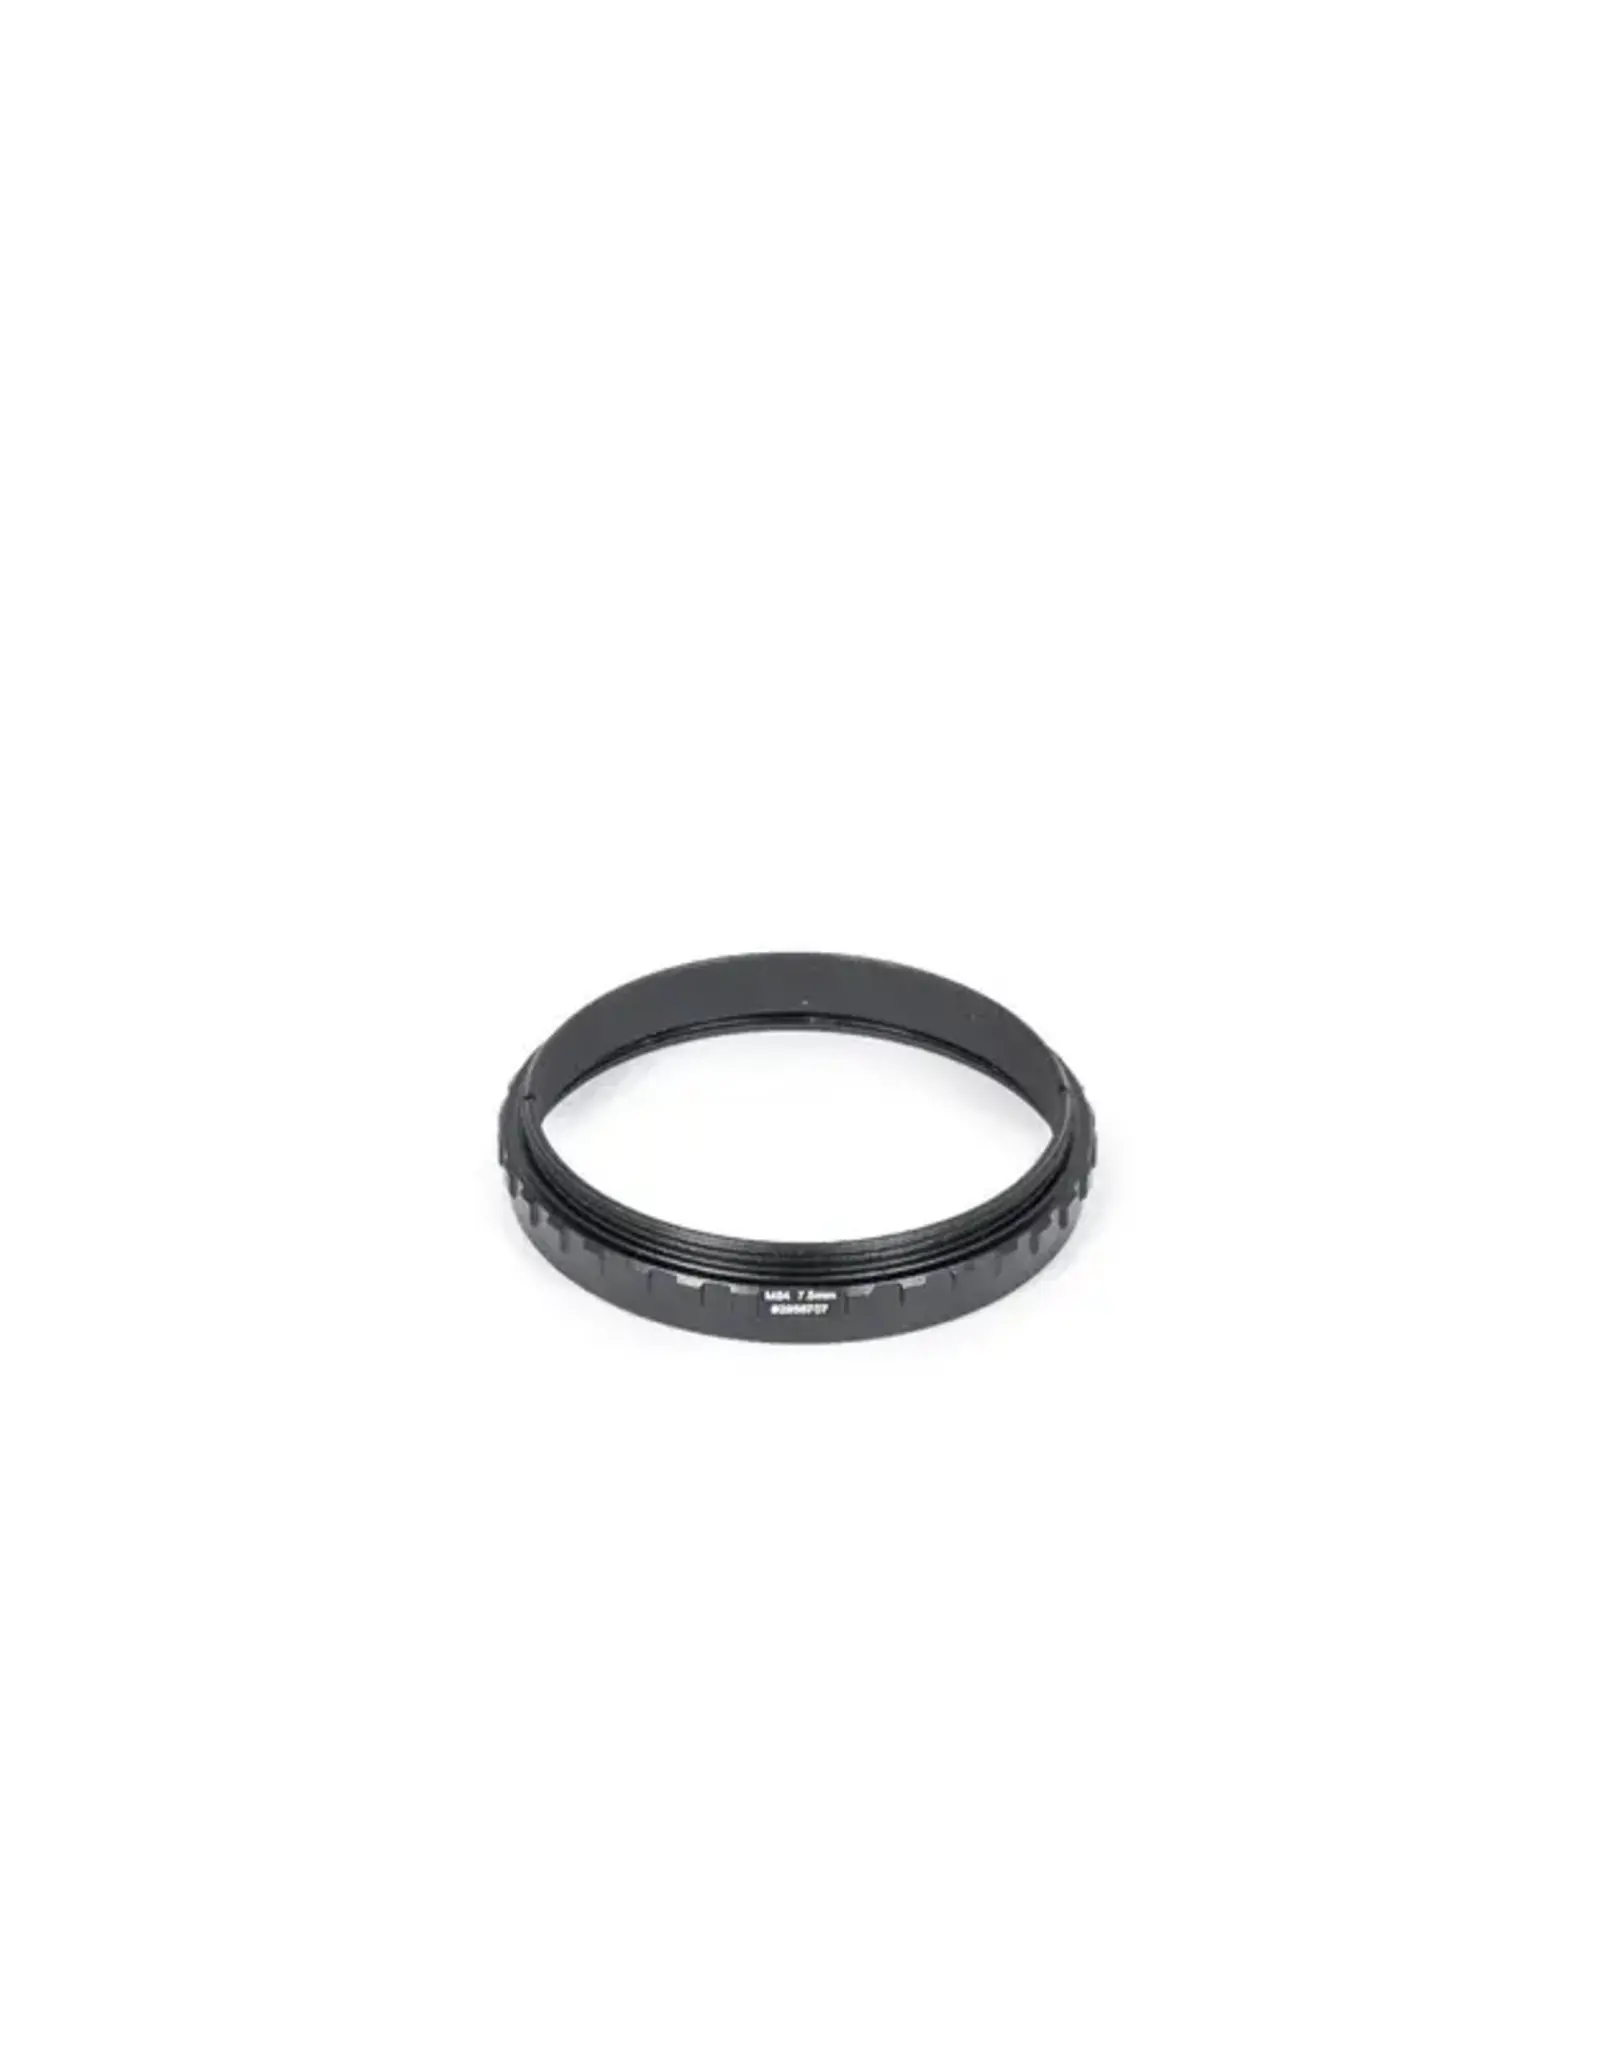 baader M54 Extension Tubes